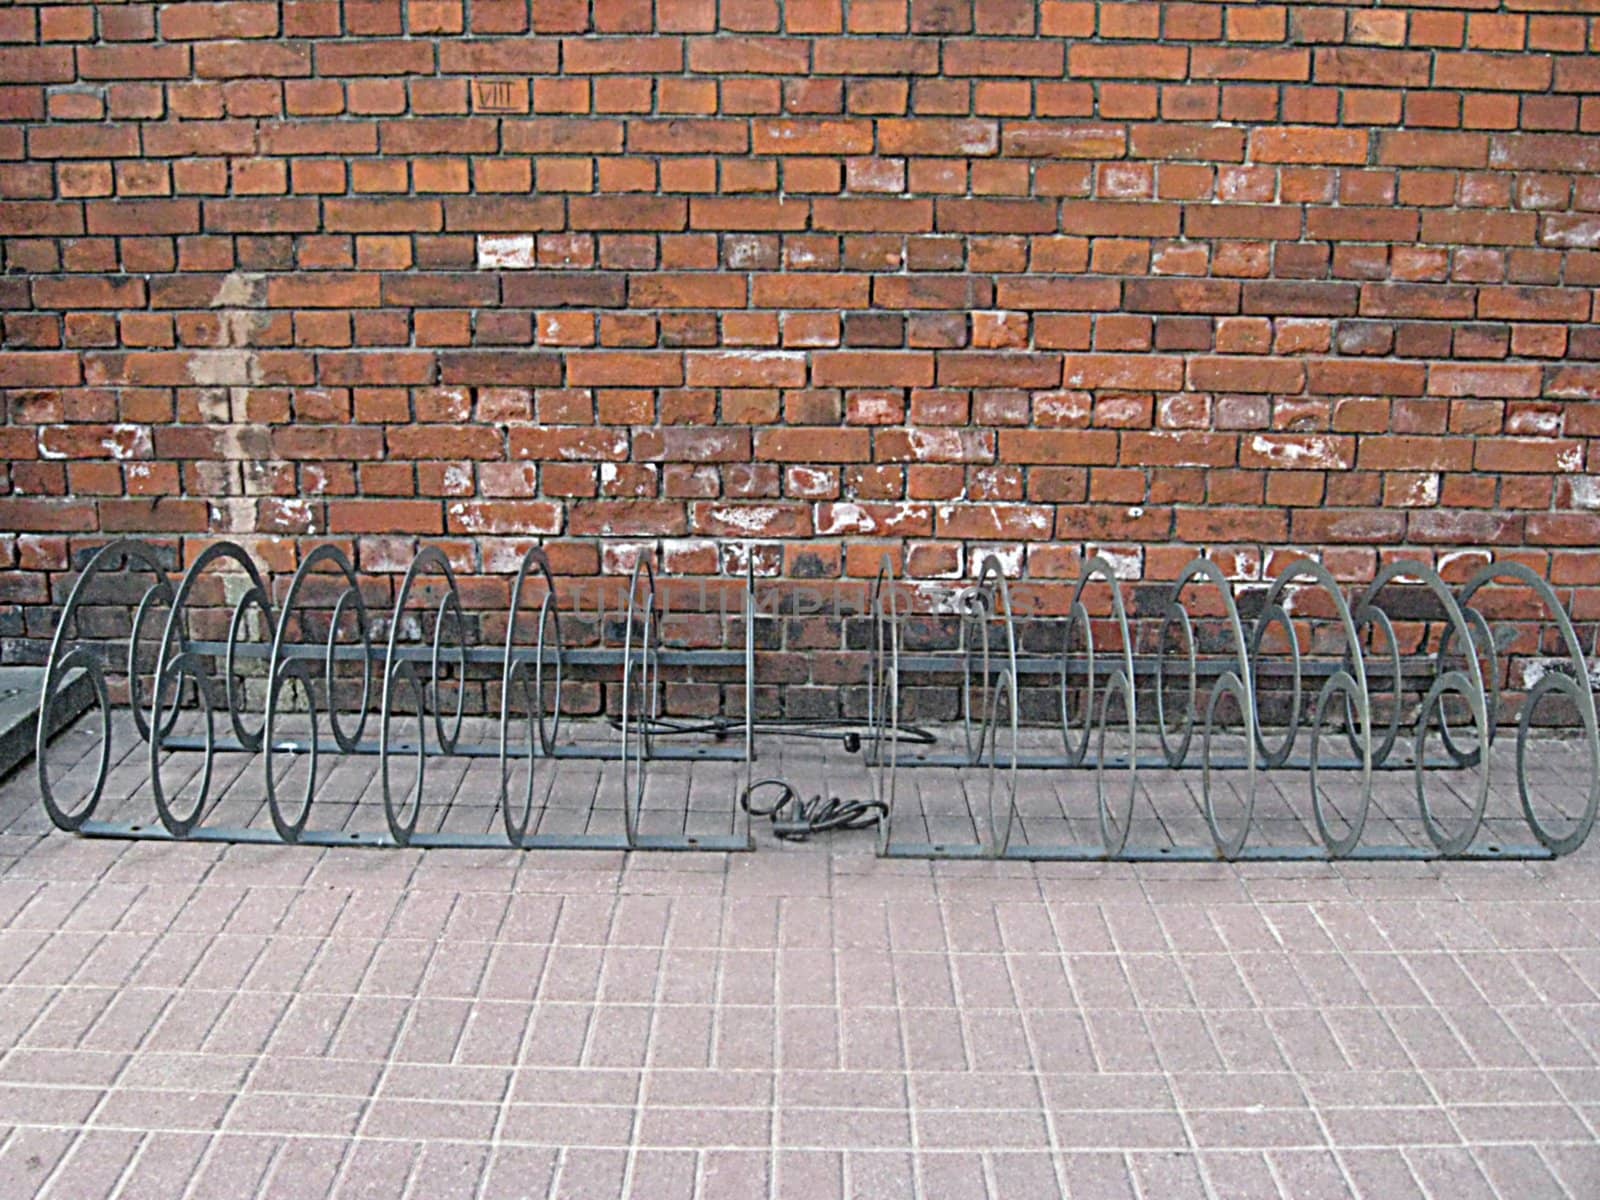 Bicycle parking space in Old Riga in Latvia